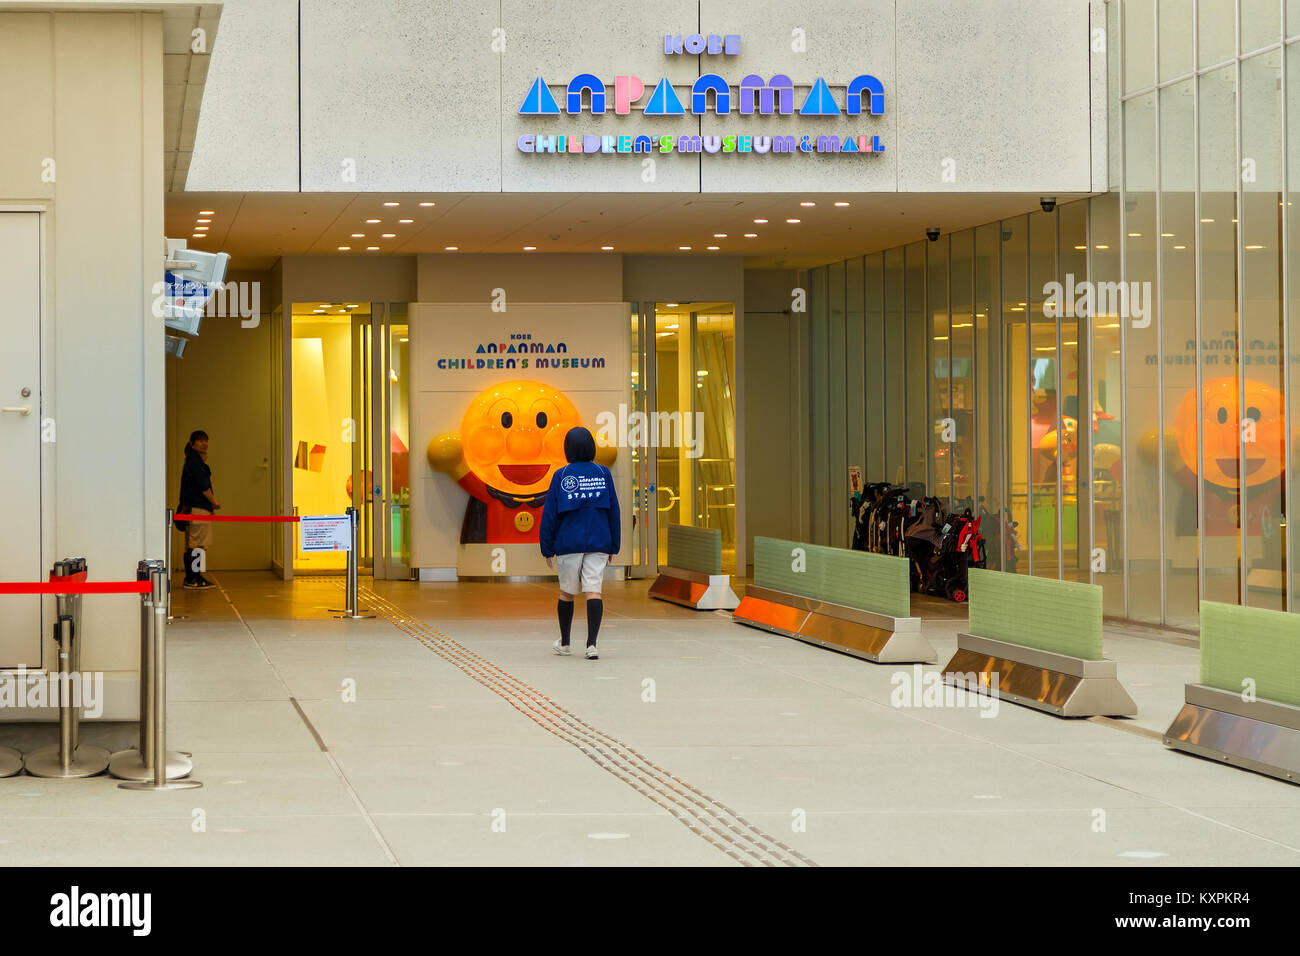 KOBE, JAPAN - OCTOBER 26: Anpanman Children's Museum in Kobe, Japan on October 26, 2014. Opened in 2013, it's one of the four complexes opened in Yoko Stock Photo